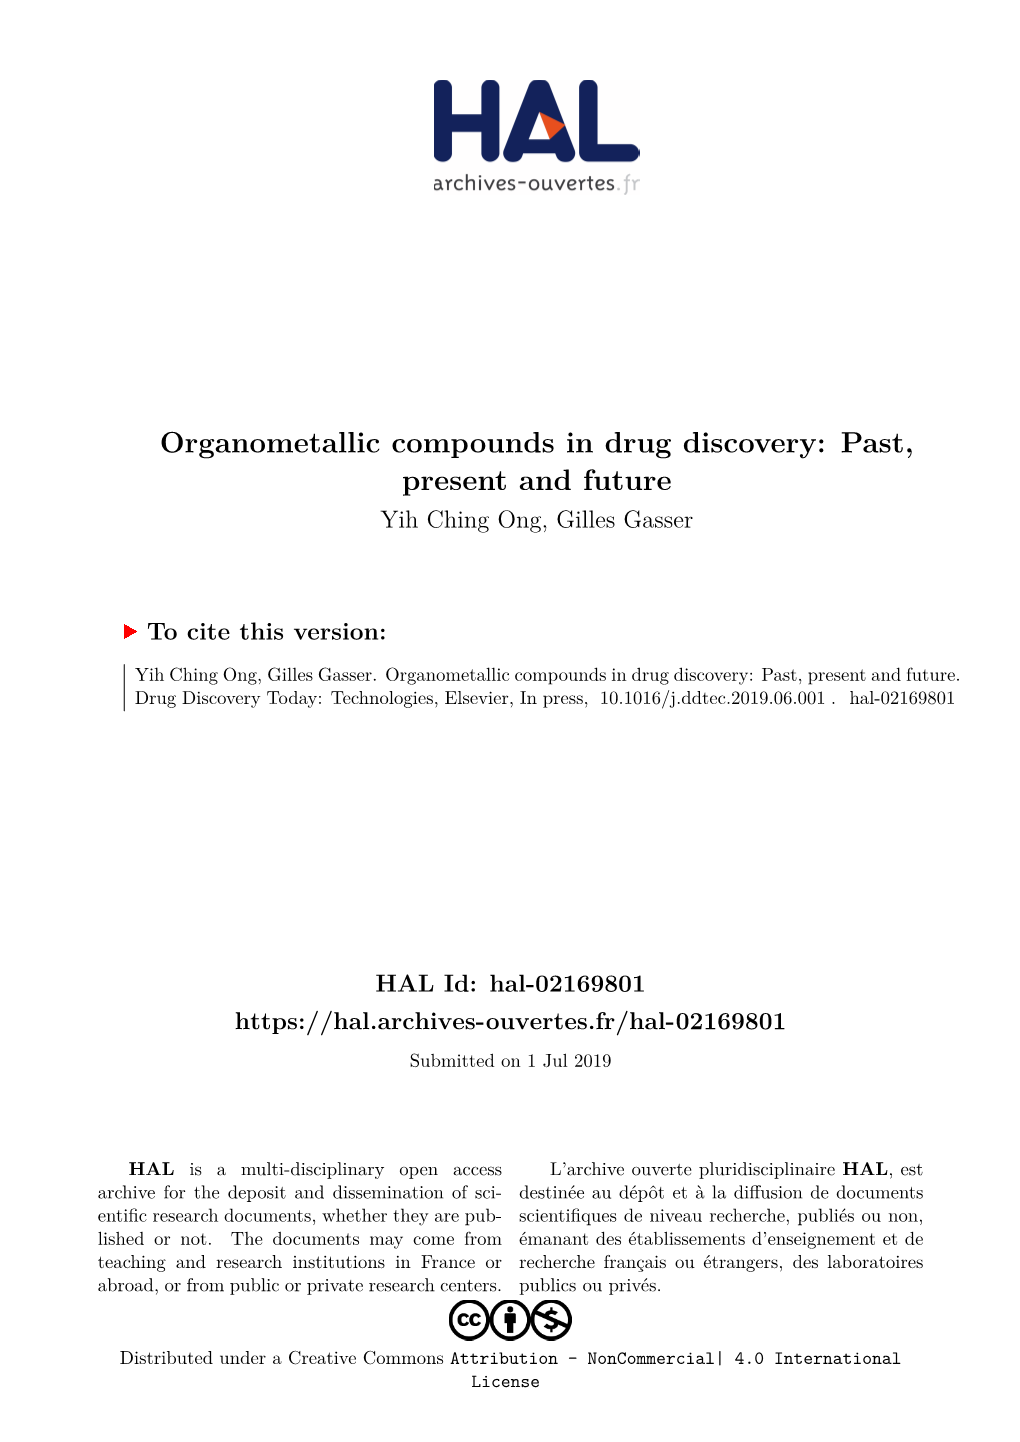 Organometallic Compounds in Drug Discovery: Past, Present and Future Yih Ching Ong, Gilles Gasser